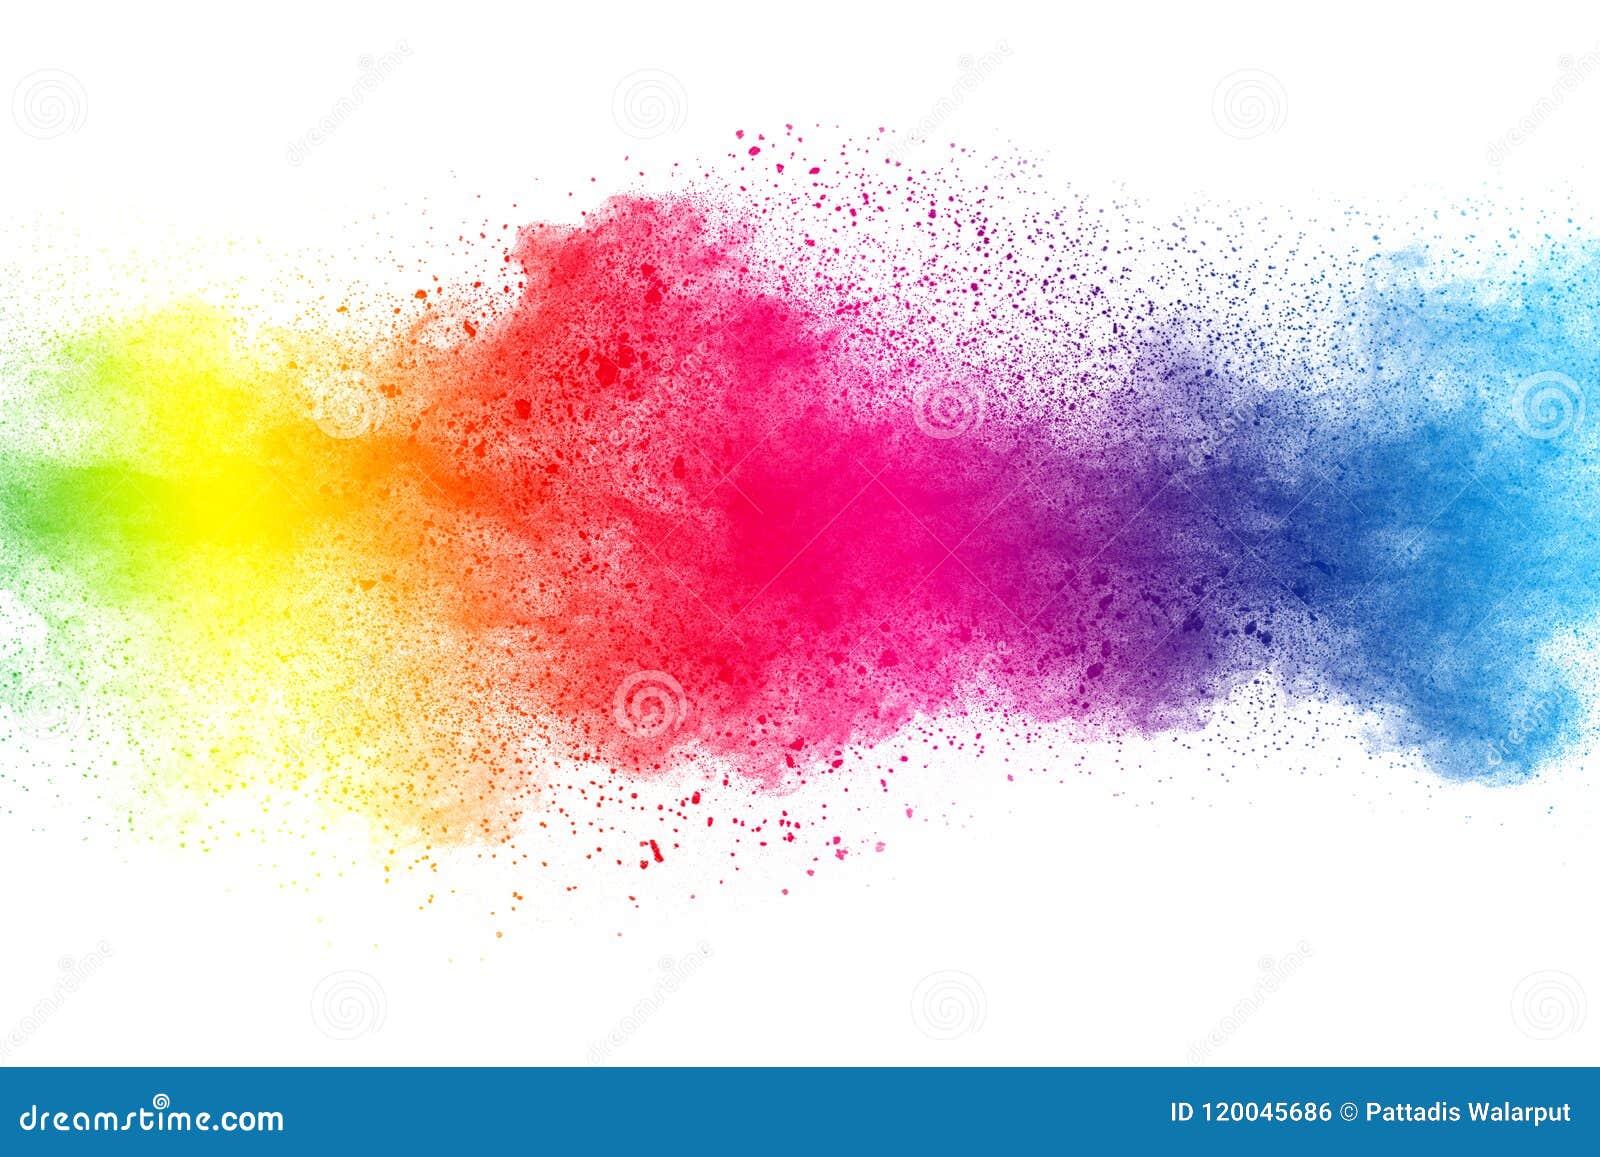 abstract multi color powder explosion on white background.